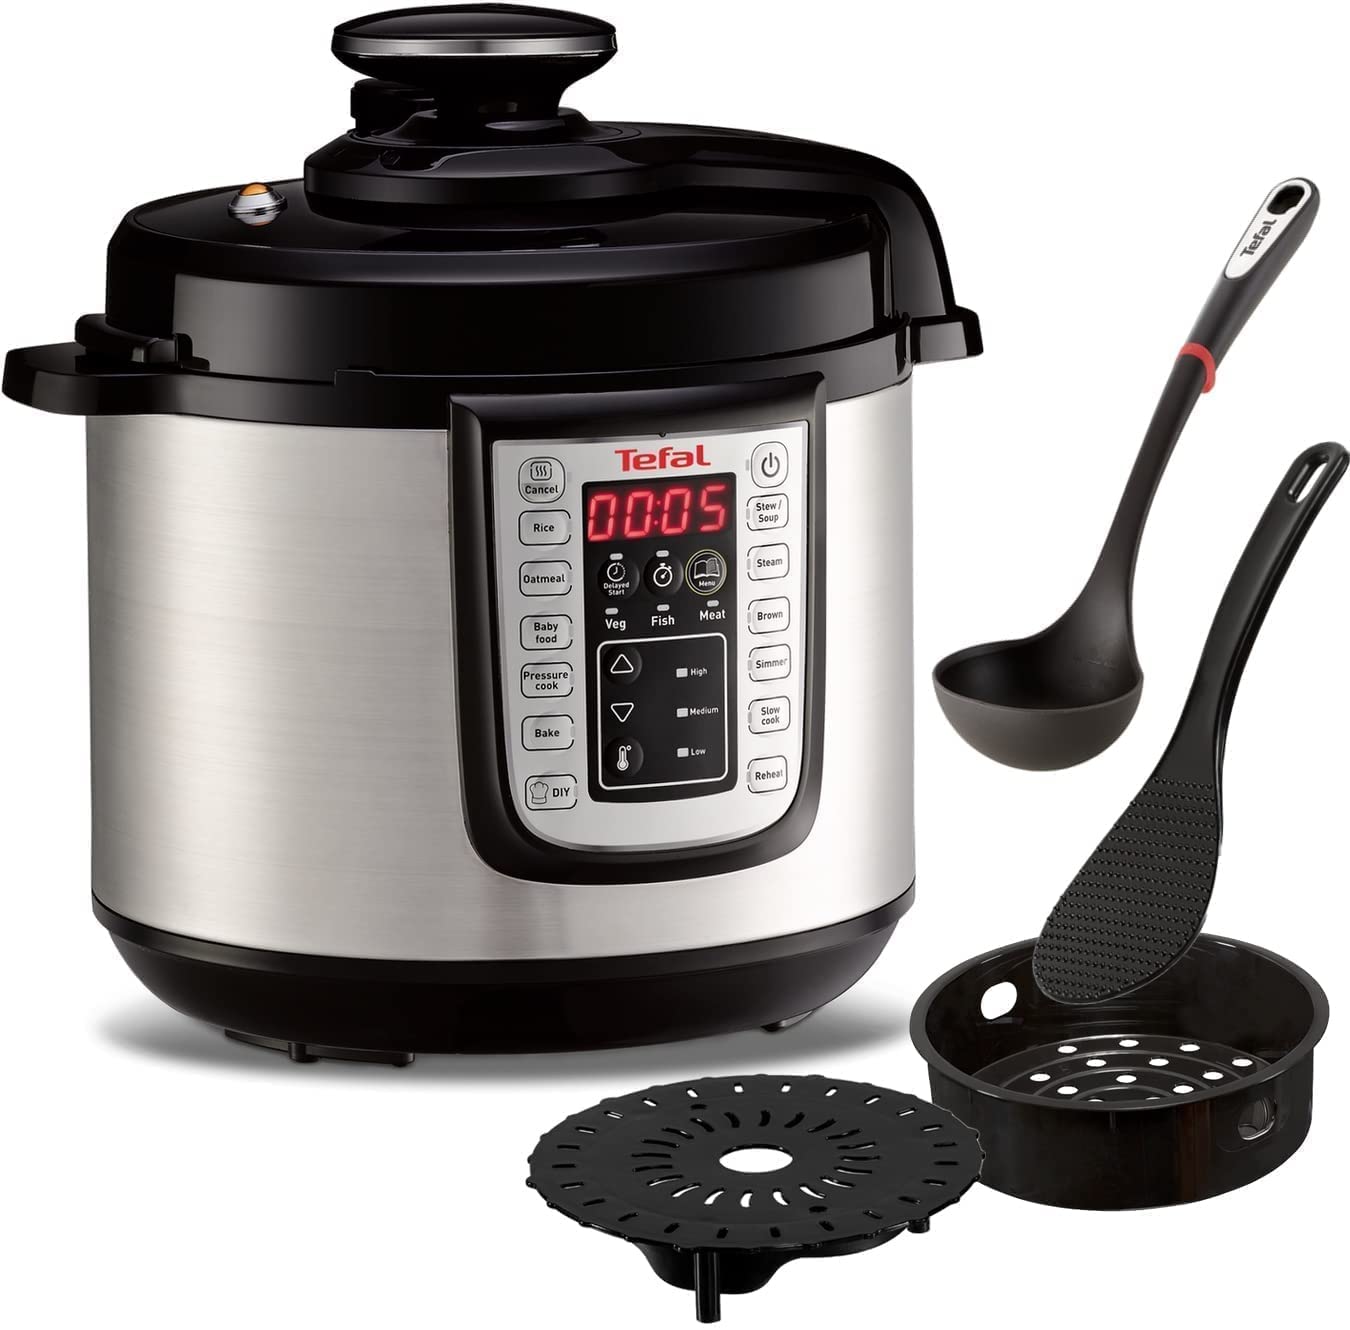 Tefal Fast & Delicious Multicooker 1200 Watt Electric Pressure Cooker, 25 Automatic Programmes, 6 Litres, Adjustable Temperature and Time, Includes Recipe Booklet, Stainless Steel/Black